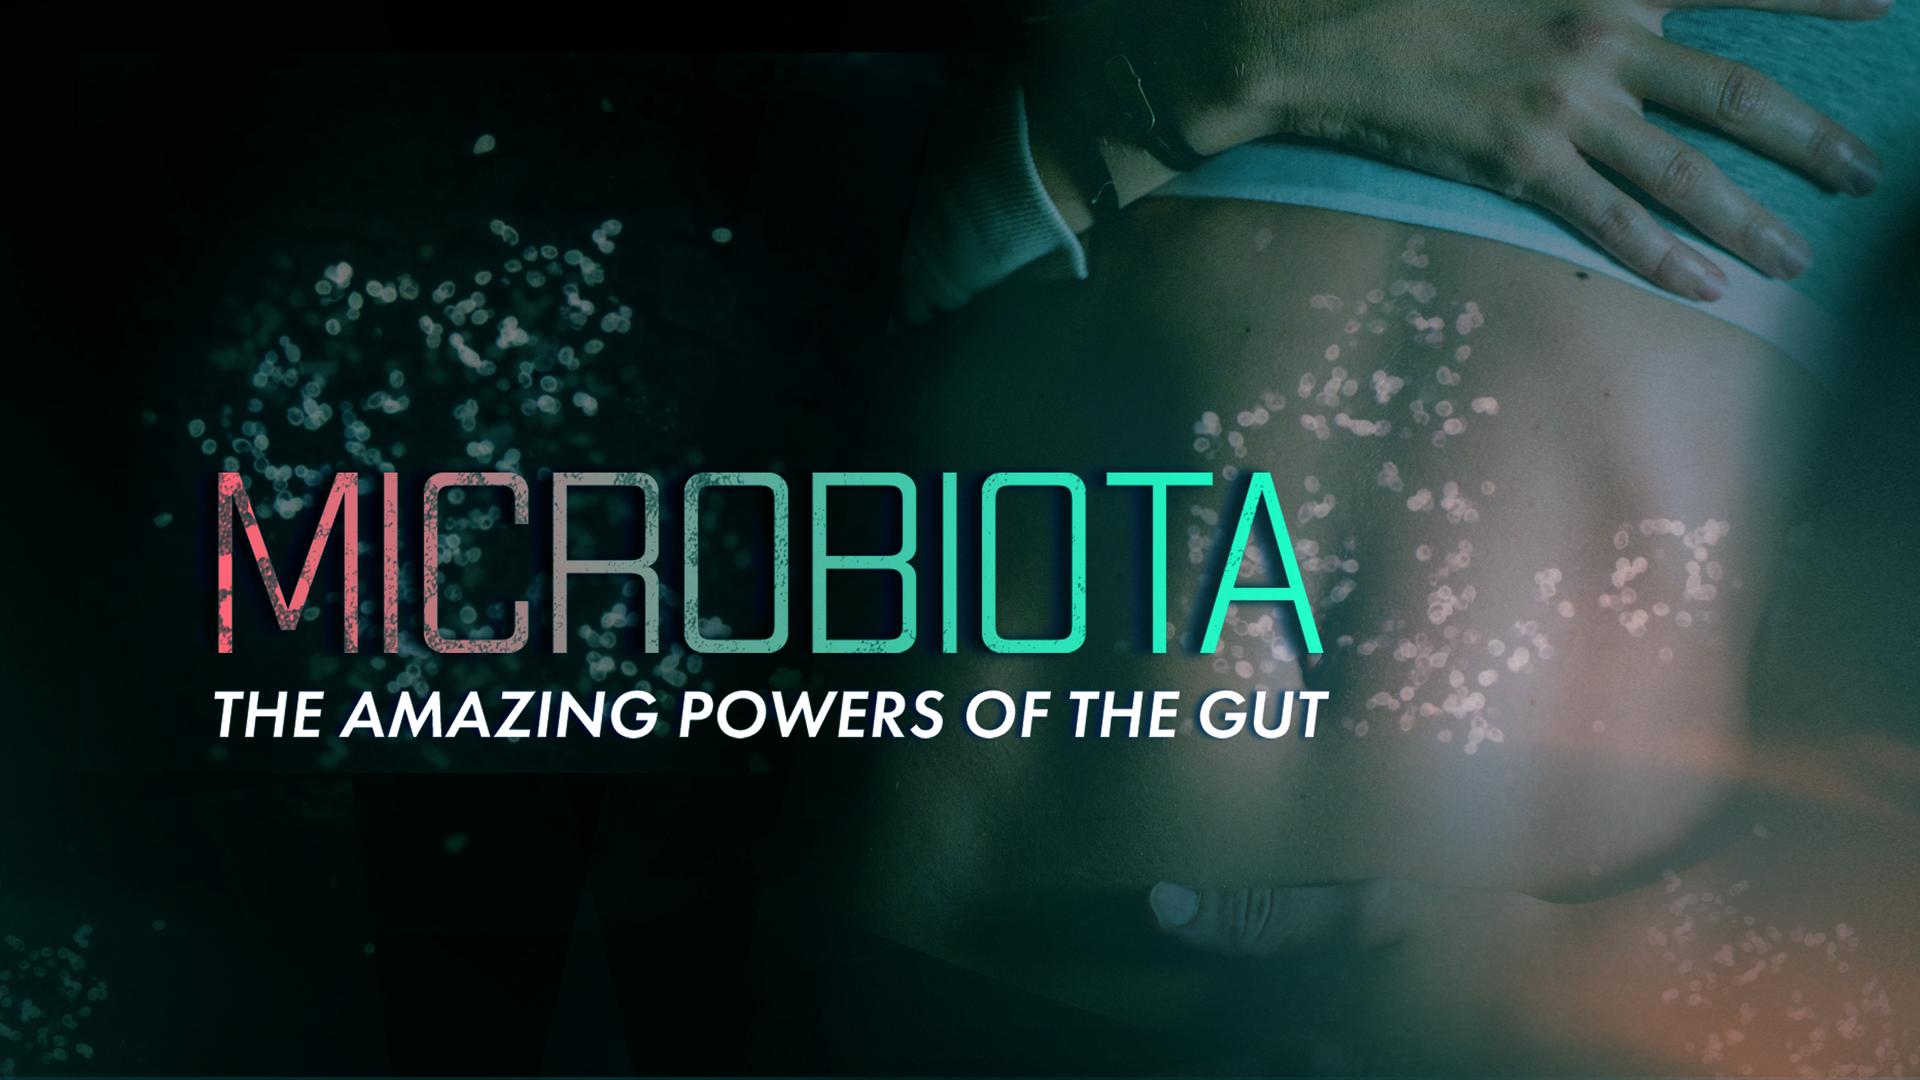 Microbiota: The Amazing Powers of the Gut